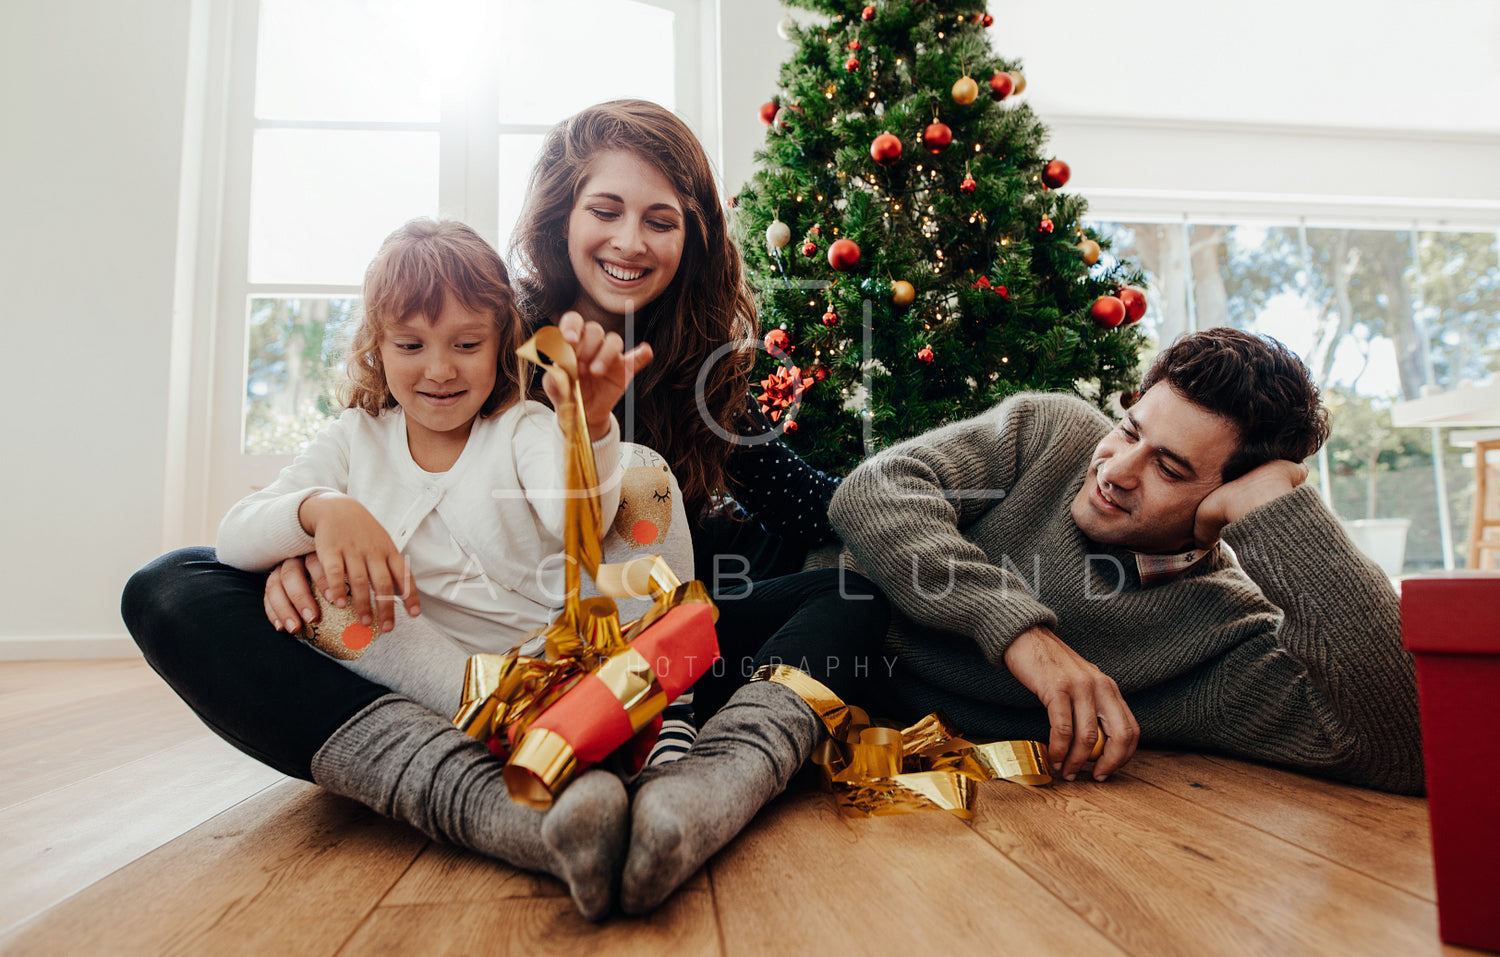 Premium Photo  A family presents a christmas present in a living room.